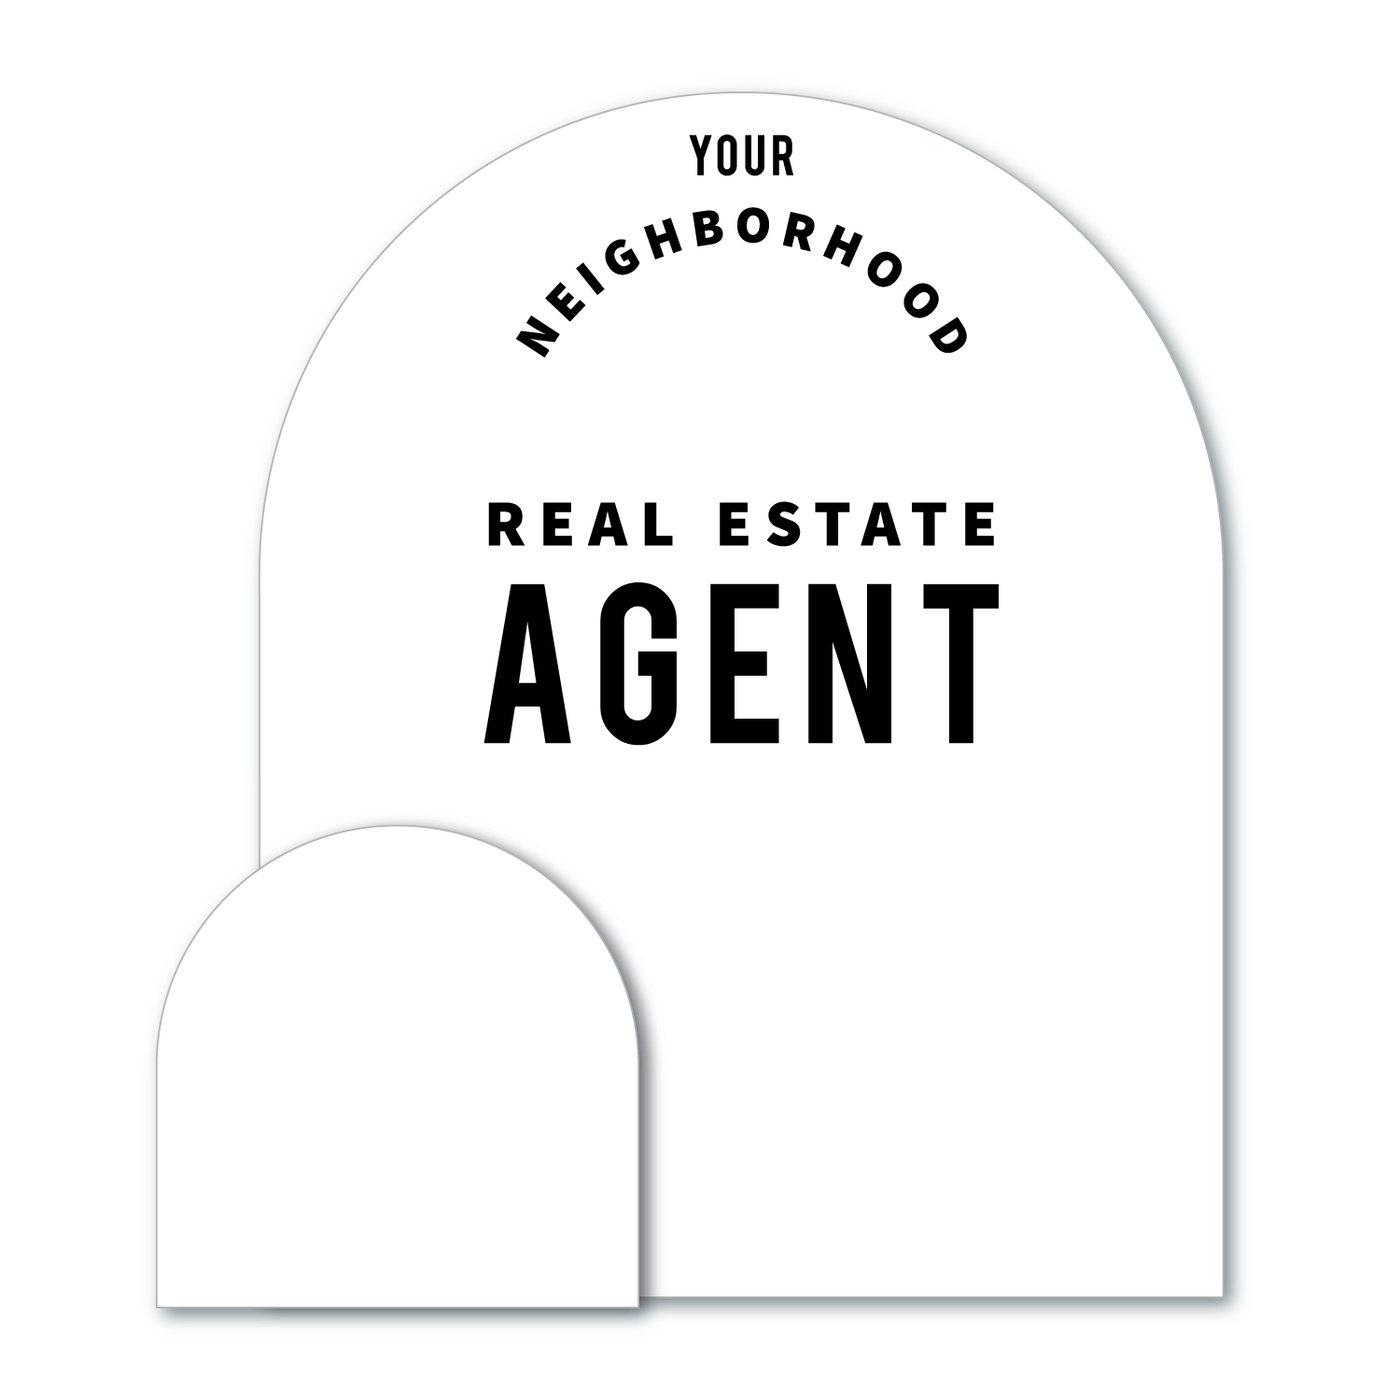 Personalized Neighborhood Agent Sign Kit - Arch-Shaped - All Things Real Estate